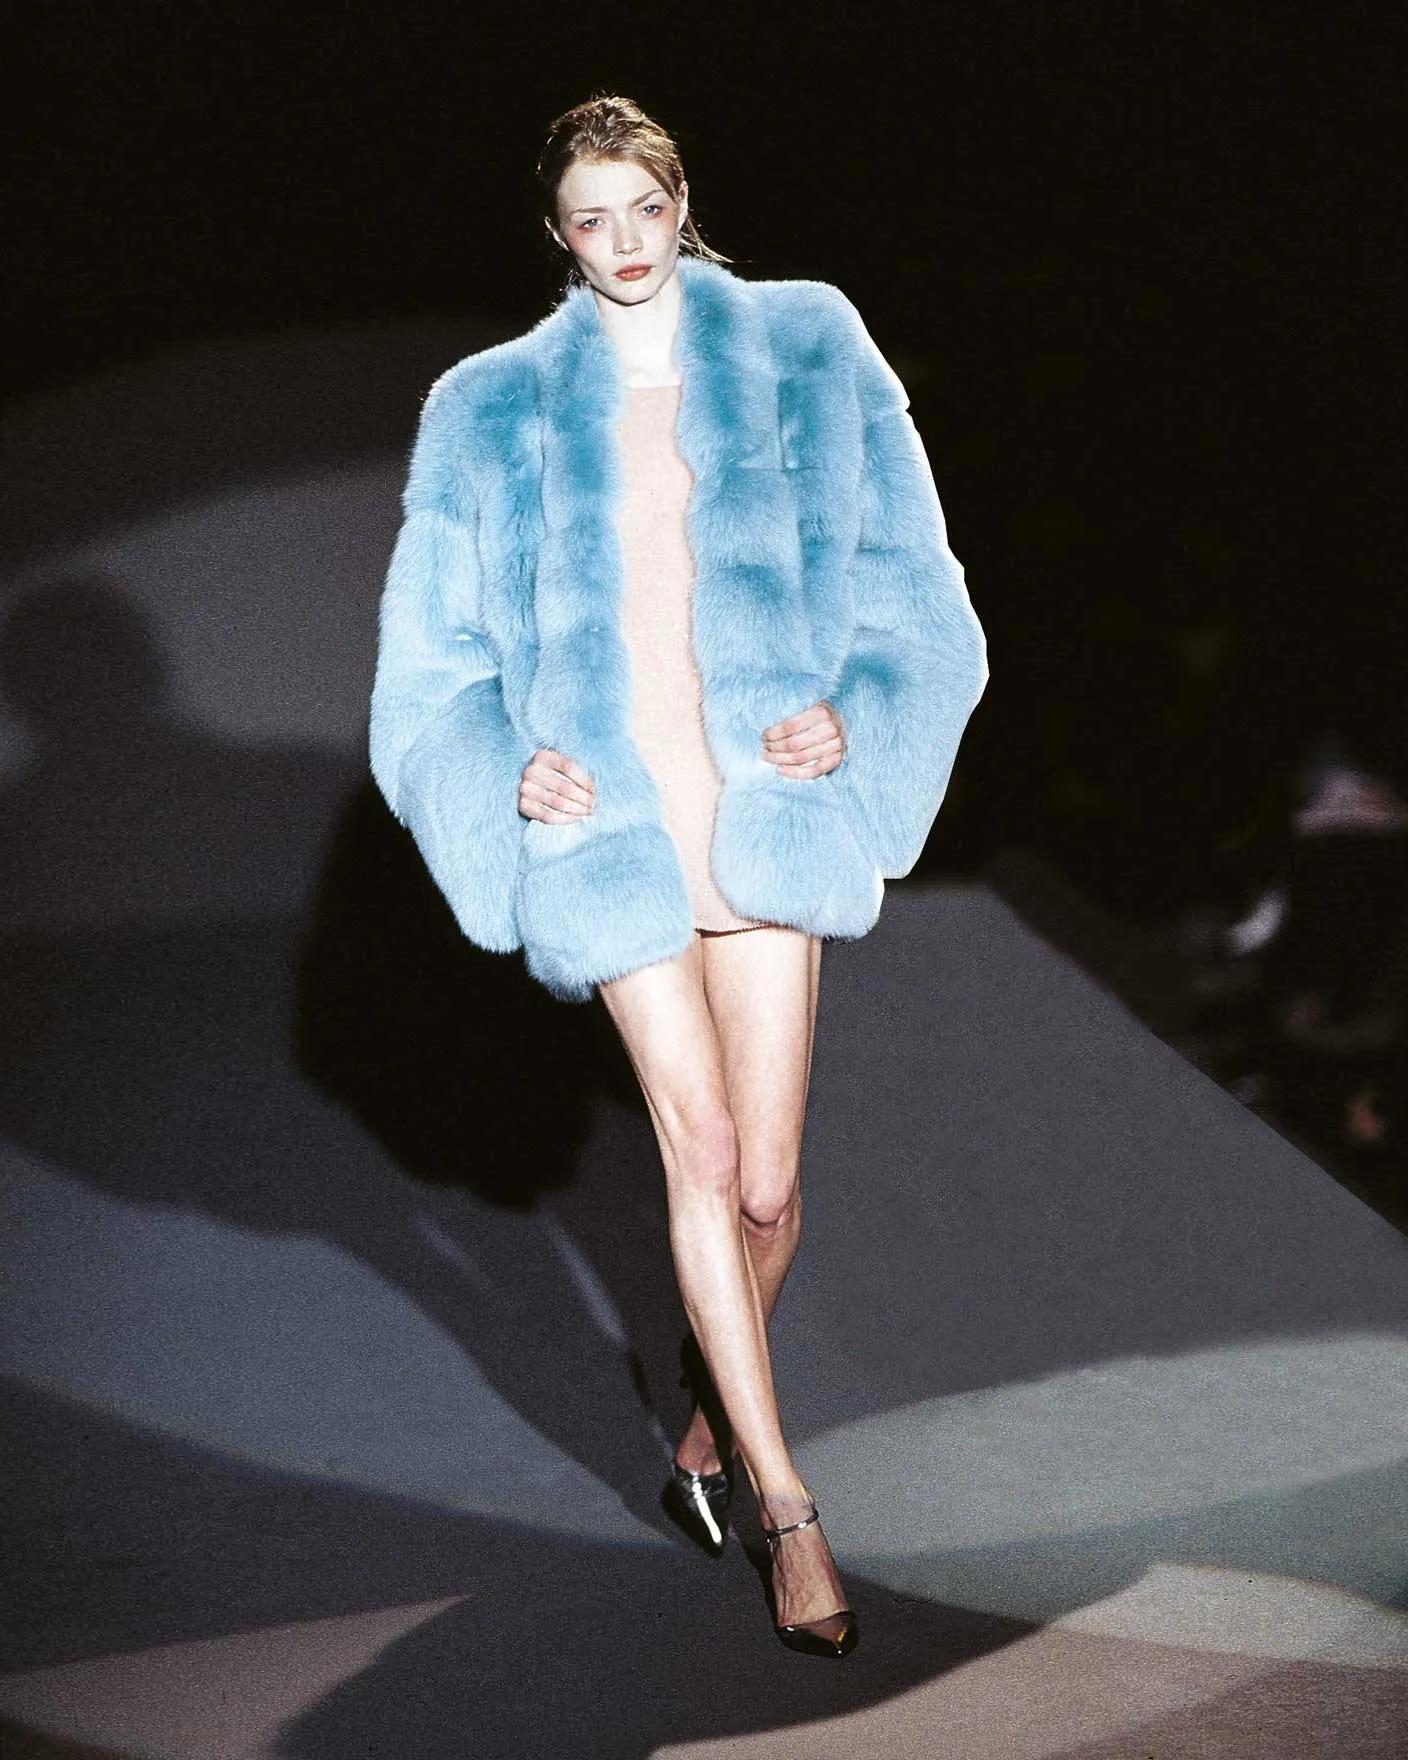 ▪ Archival Gucci Fox Fur 'Chubby' Jacket 
▪ Creative Director: Tom Ford
▪ Fall-Winter 1997
▪ Sold by One of a Kind Archive
▪ Museum Grade
▪ Crafted from aqua blue-dyed fox fur
▪ Features an oversized fit, providing a relaxed and comfortable